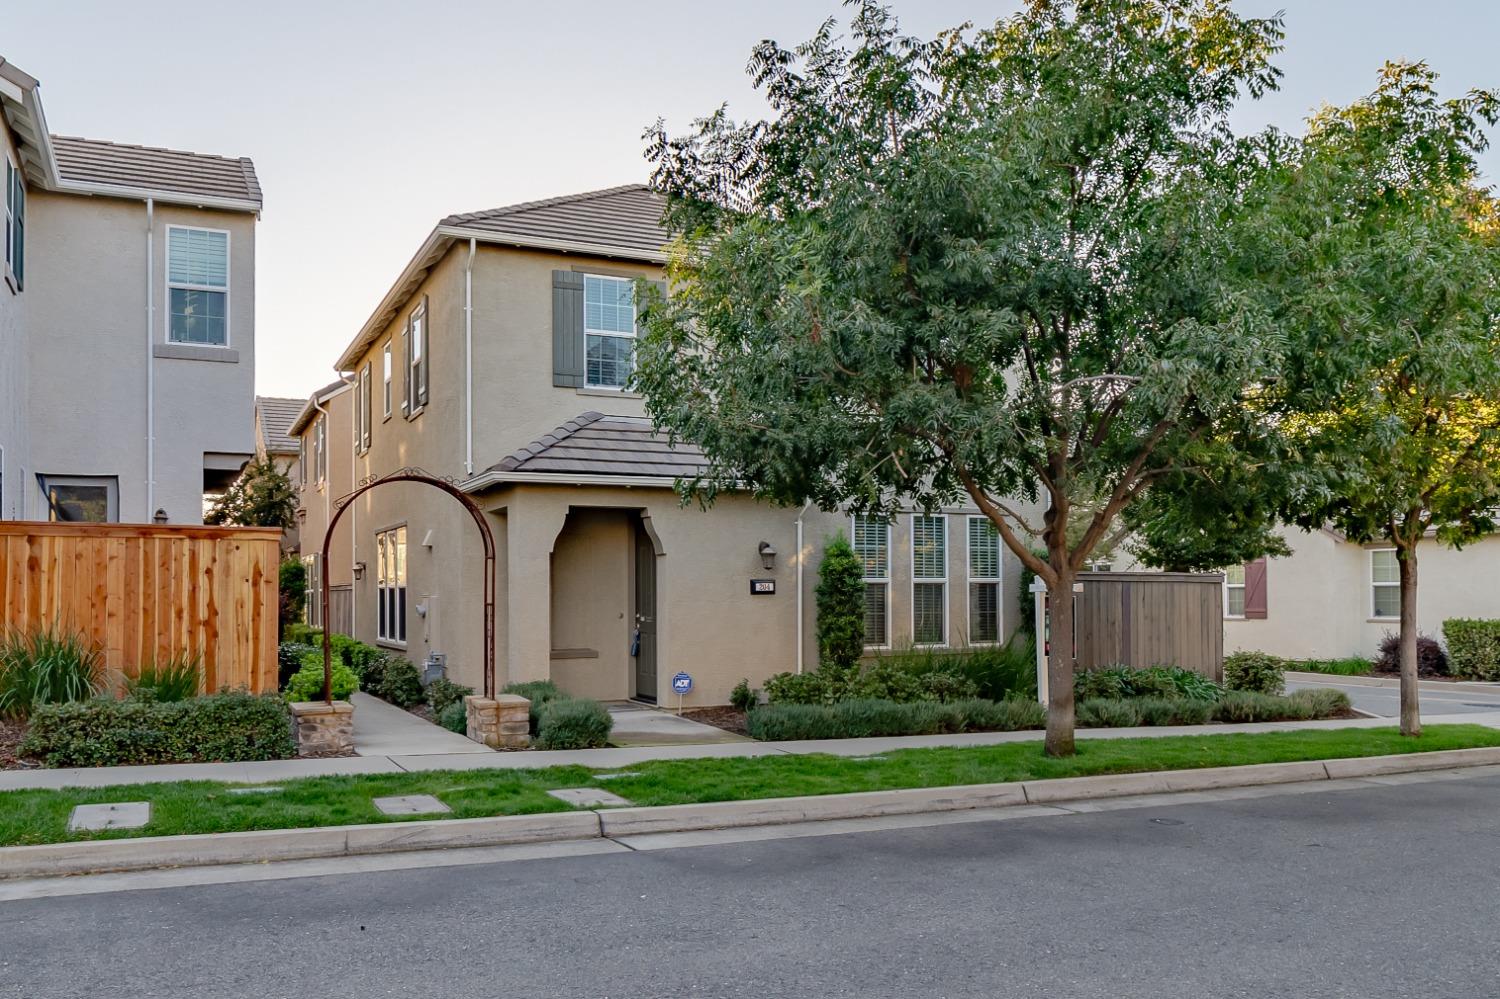 Photo of 204 Talmont Cir in Roseville, CA